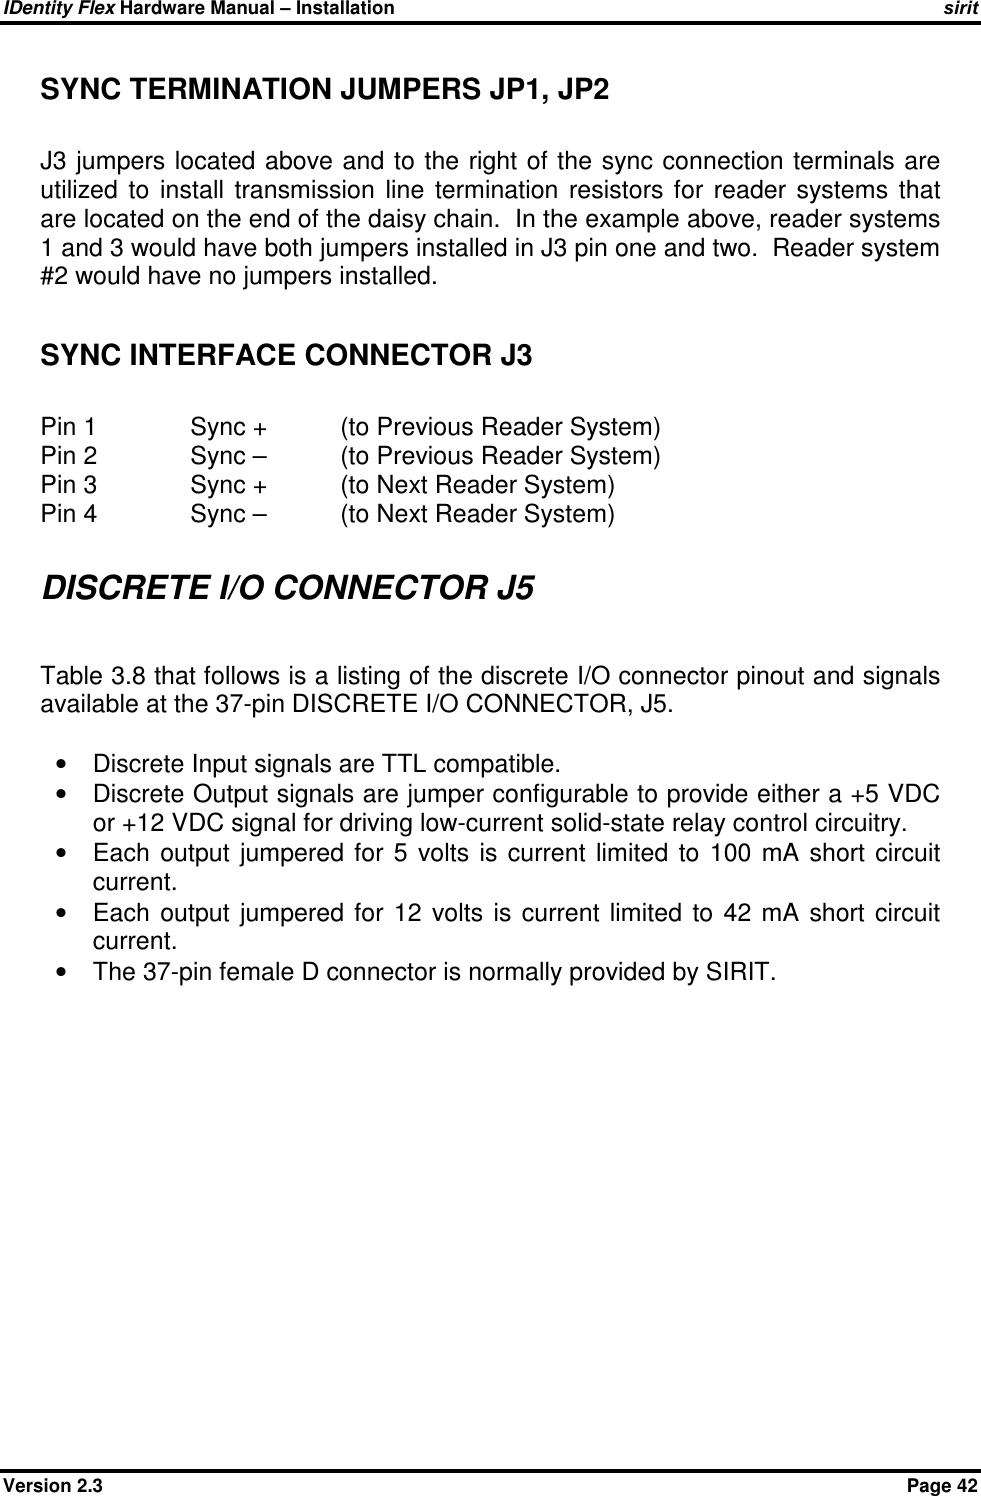 IDentity Flex Hardware Manual – Installation   sirit Version 2.3    Page 42 SYNC TERMINATION JUMPERS JP1, JP2   J3 jumpers  located above and to the right of the  sync  connection terminals are utilized  to  install  transmission  line  termination  resistors  for  reader  systems  that are located on the end of the daisy chain.  In the example above, reader systems 1 and 3 would have both jumpers installed in J3 pin one and two.  Reader system #2 would have no jumpers installed.  SYNC INTERFACE CONNECTOR J3  Pin 1    Sync +   (to Previous Reader System) Pin 2    Sync –   (to Previous Reader System) Pin 3    Sync +   (to Next Reader System) Pin 4    Sync –   (to Next Reader System)  DISCRETE I/O CONNECTOR J5  Table 3.8 that follows is a listing of the discrete I/O connector pinout and signals available at the 37-pin DISCRETE I/O CONNECTOR, J5.  •  Discrete Input signals are TTL compatible. •  Discrete Output signals are jumper configurable to provide either a +5 VDC or +12 VDC signal for driving low-current solid-state relay control circuitry. •  Each  output  jumpered  for  5  volts  is  current  limited  to  100  mA  short  circuit current. •  Each  output  jumpered  for  12  volts  is  current  limited  to  42  mA  short  circuit current.  •  The 37-pin female D connector is normally provided by SIRIT.  